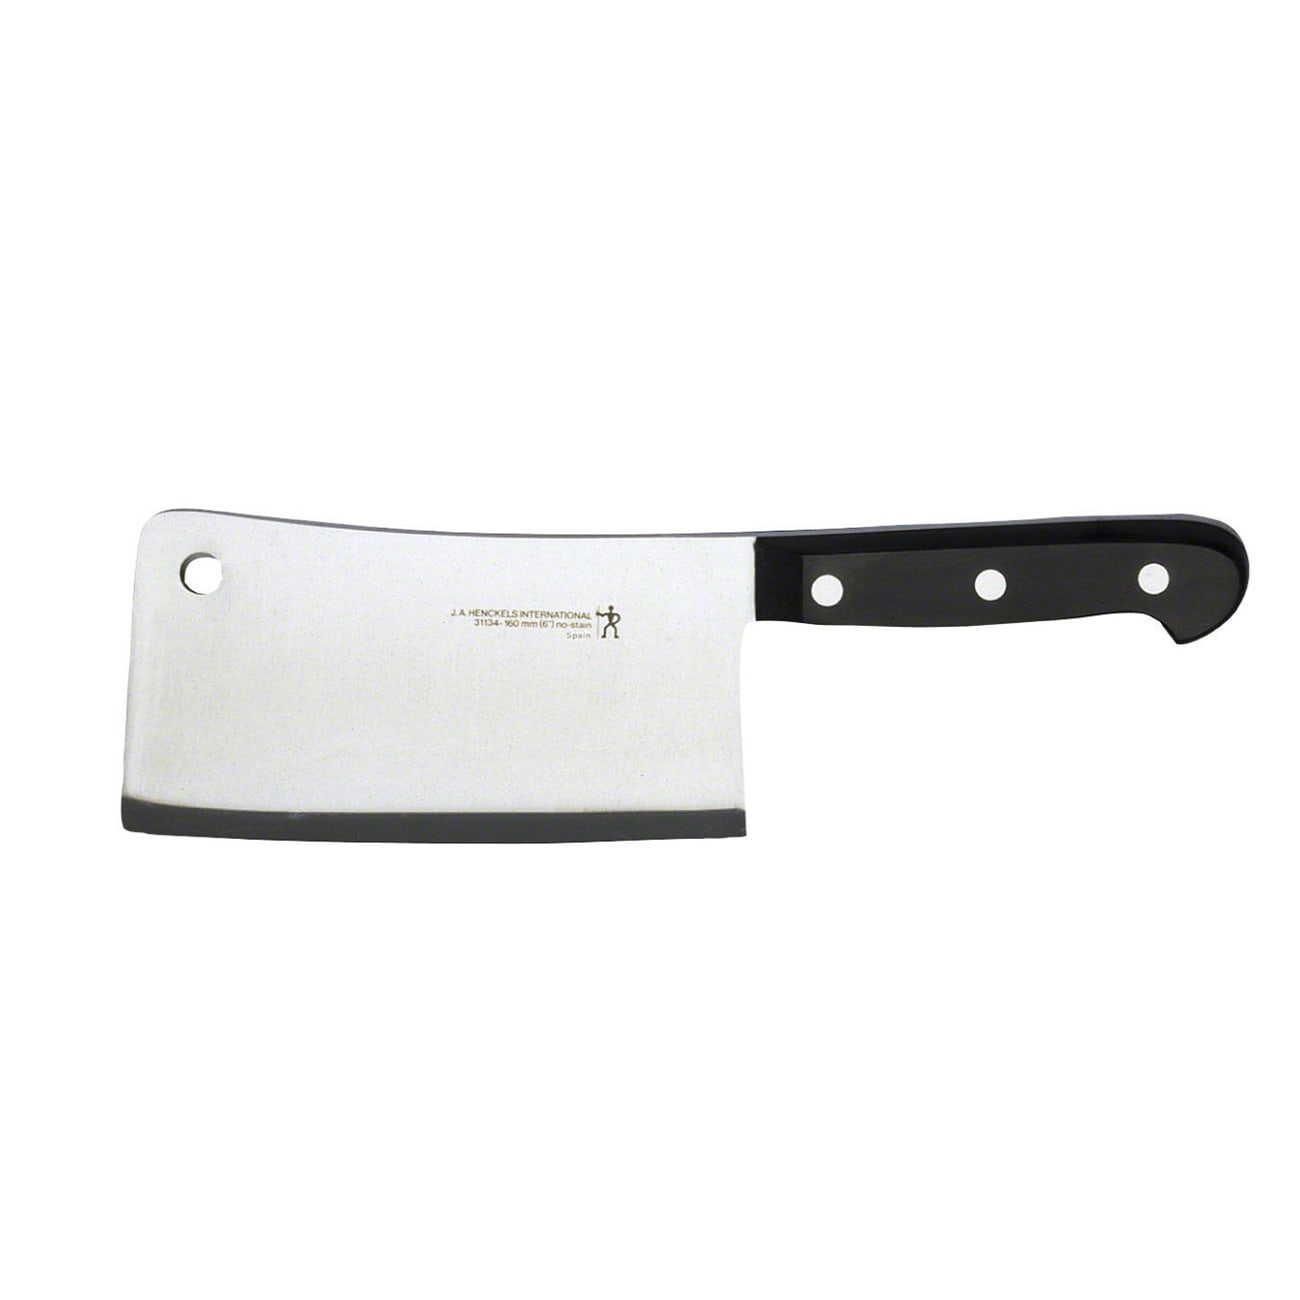 Victorinox 40090 Curved 8 Chinese Cleaver with Wood Handle